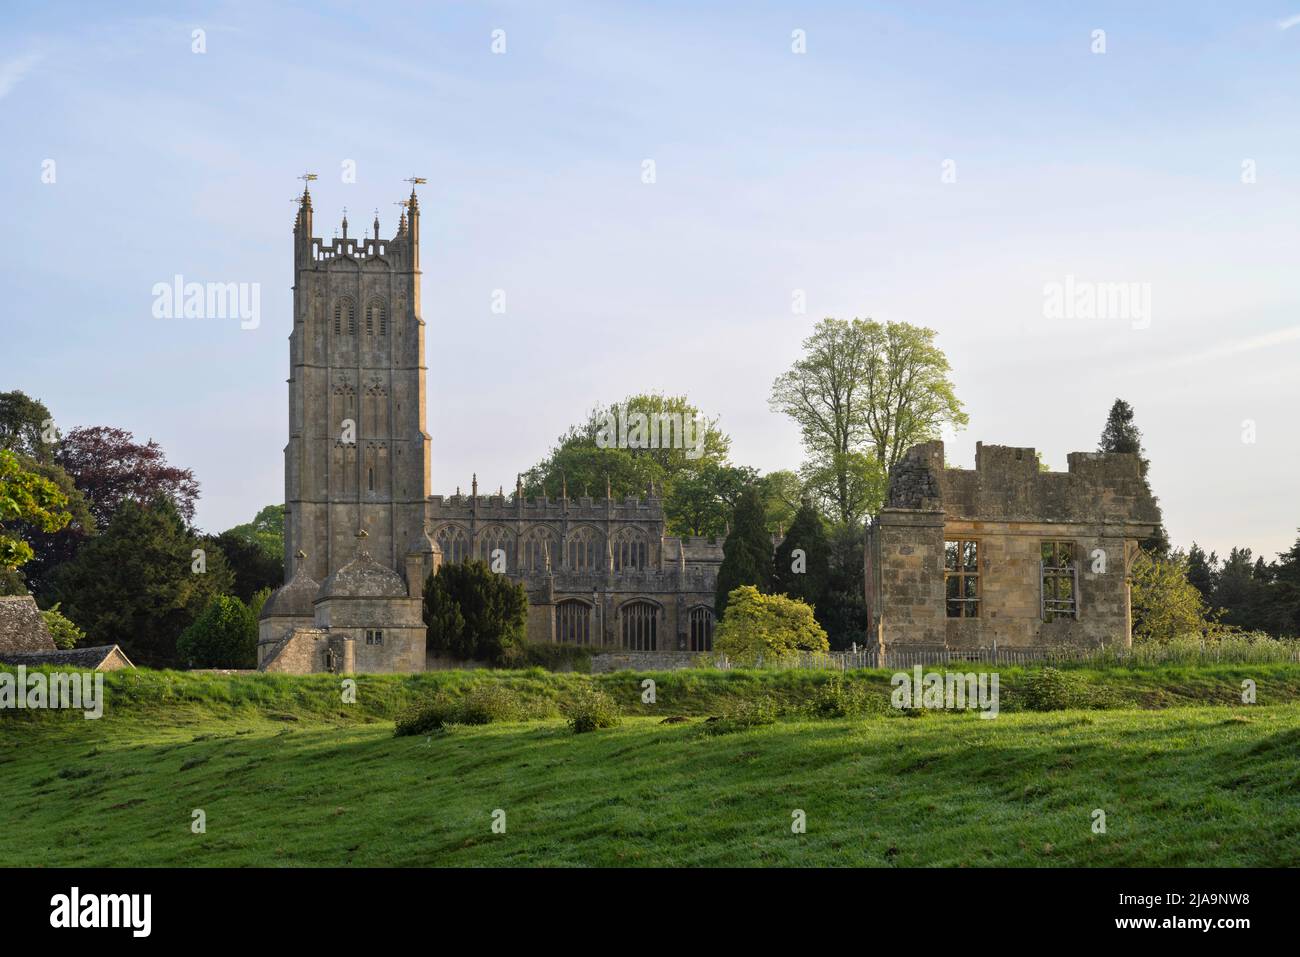 Chiesa e rovine a Chipping Campden, Cotswolds, Inghilterra. Foto Stock